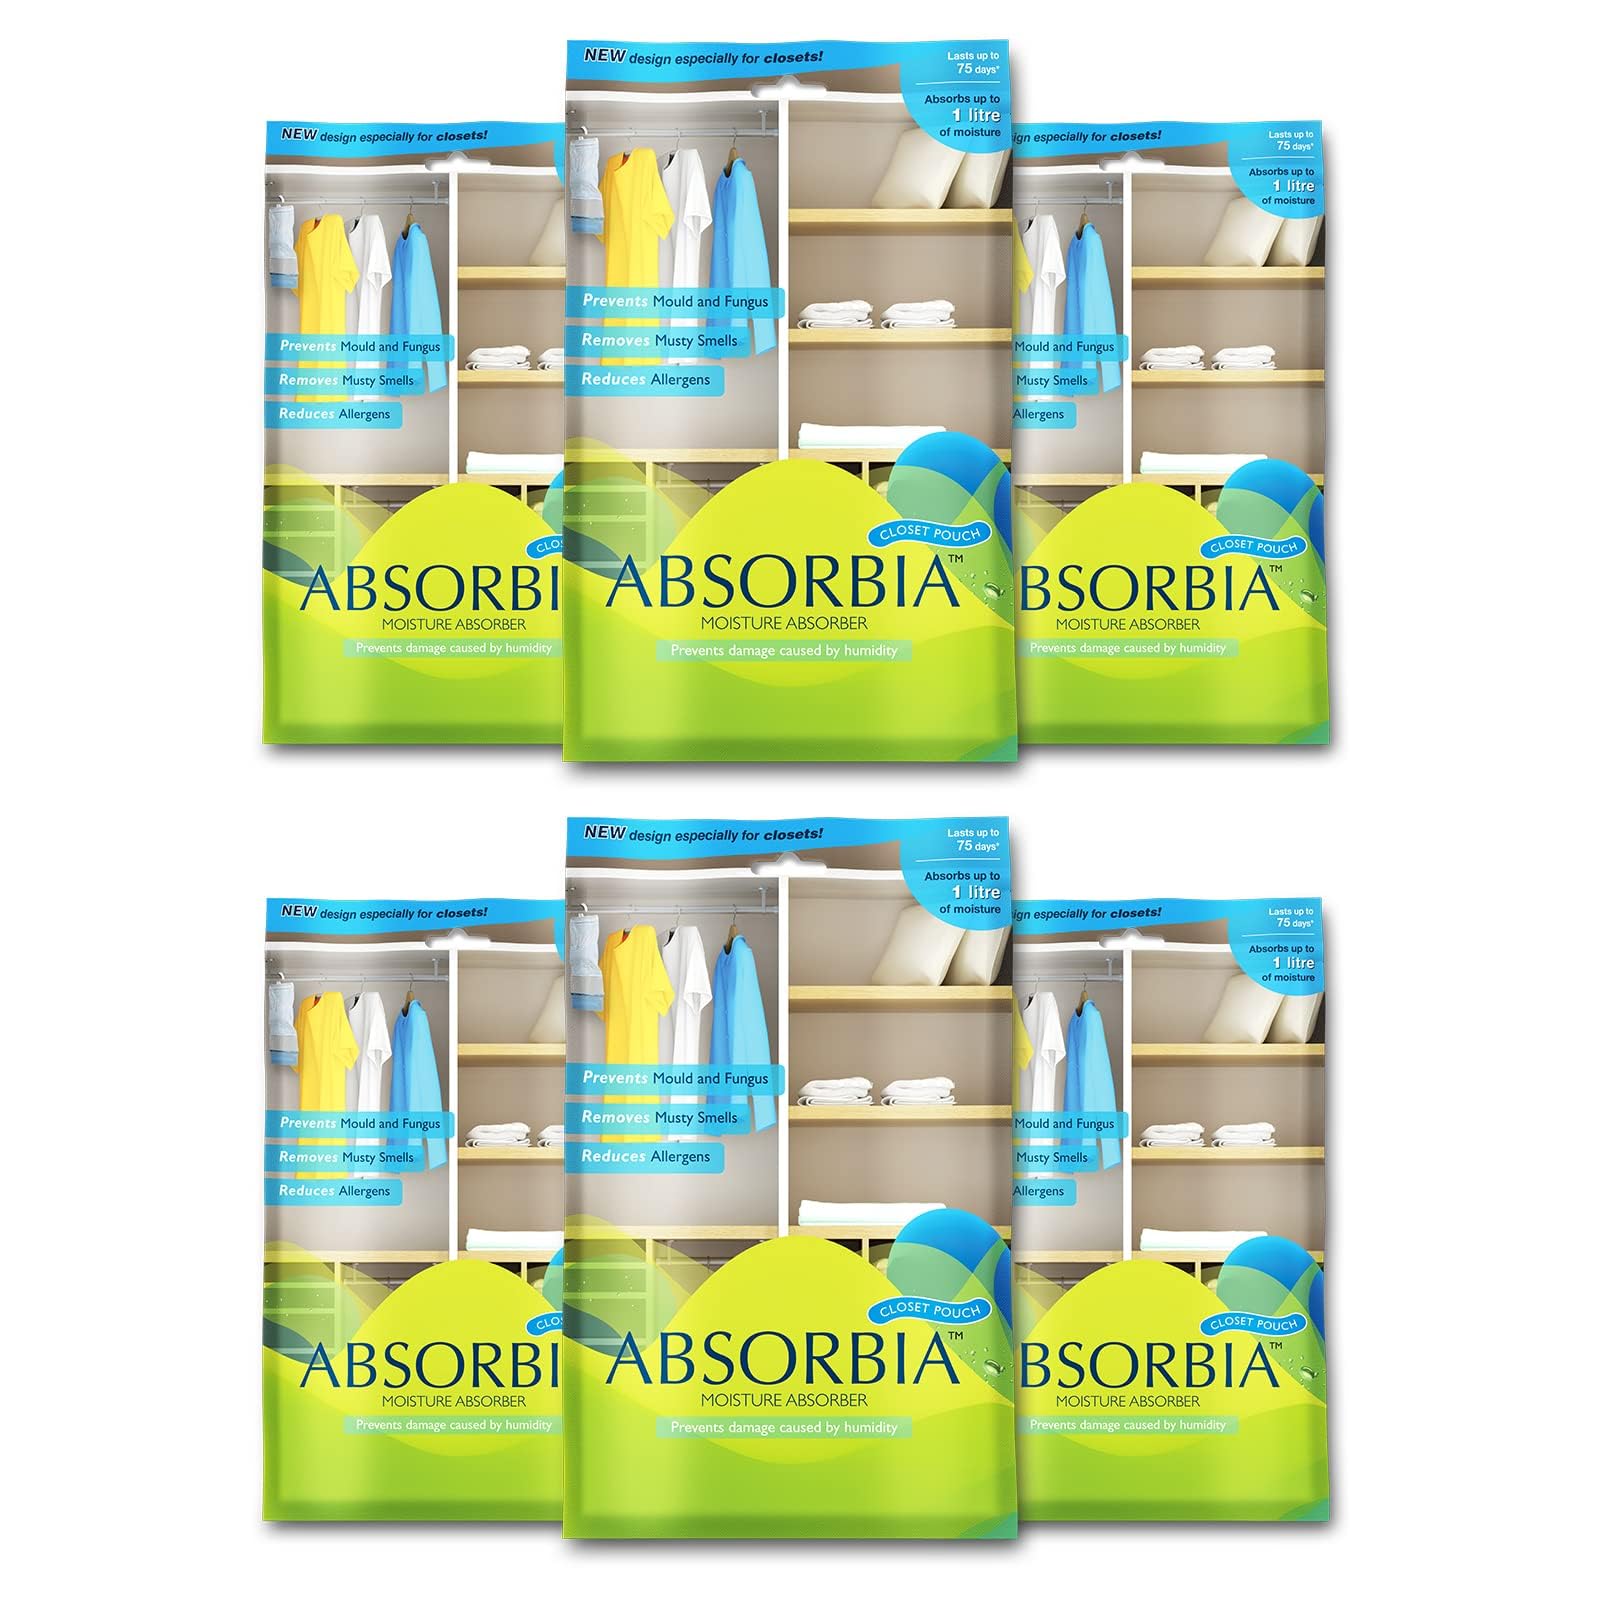 Absorbia Moisture Absorber| Absorbia Hanging Pouch - Season Pack of 12 (880ml Each) | Dehumidifier for Wardrobe, Closet Bathroom| Fights Against Moisture, Mould, Fungus Musty Smells…